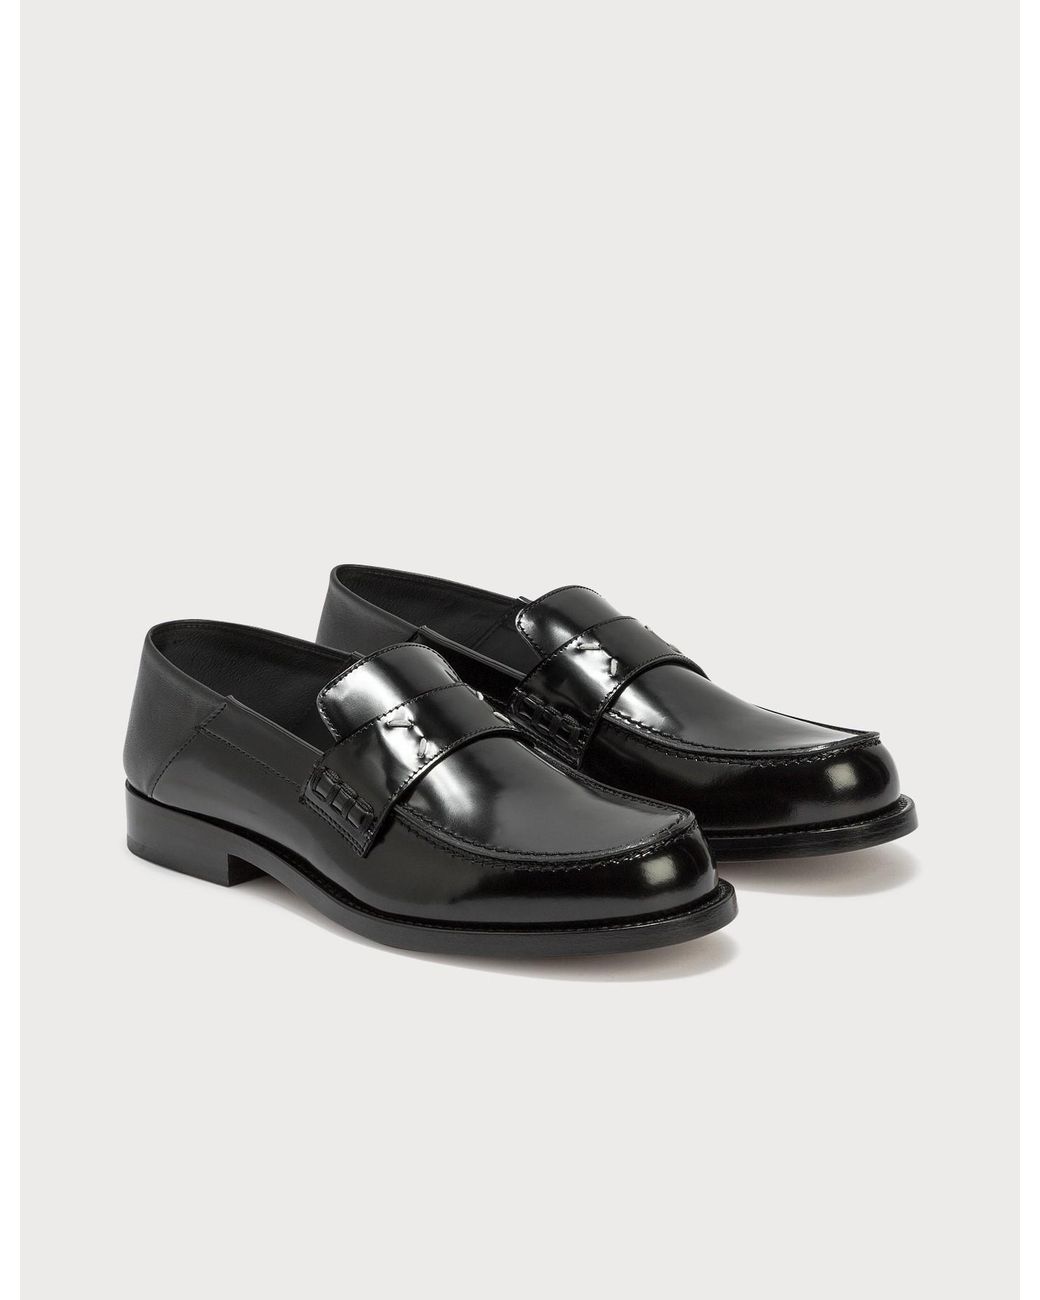 Maison Margiela Leather Stitch Loafer in Black - Lyst